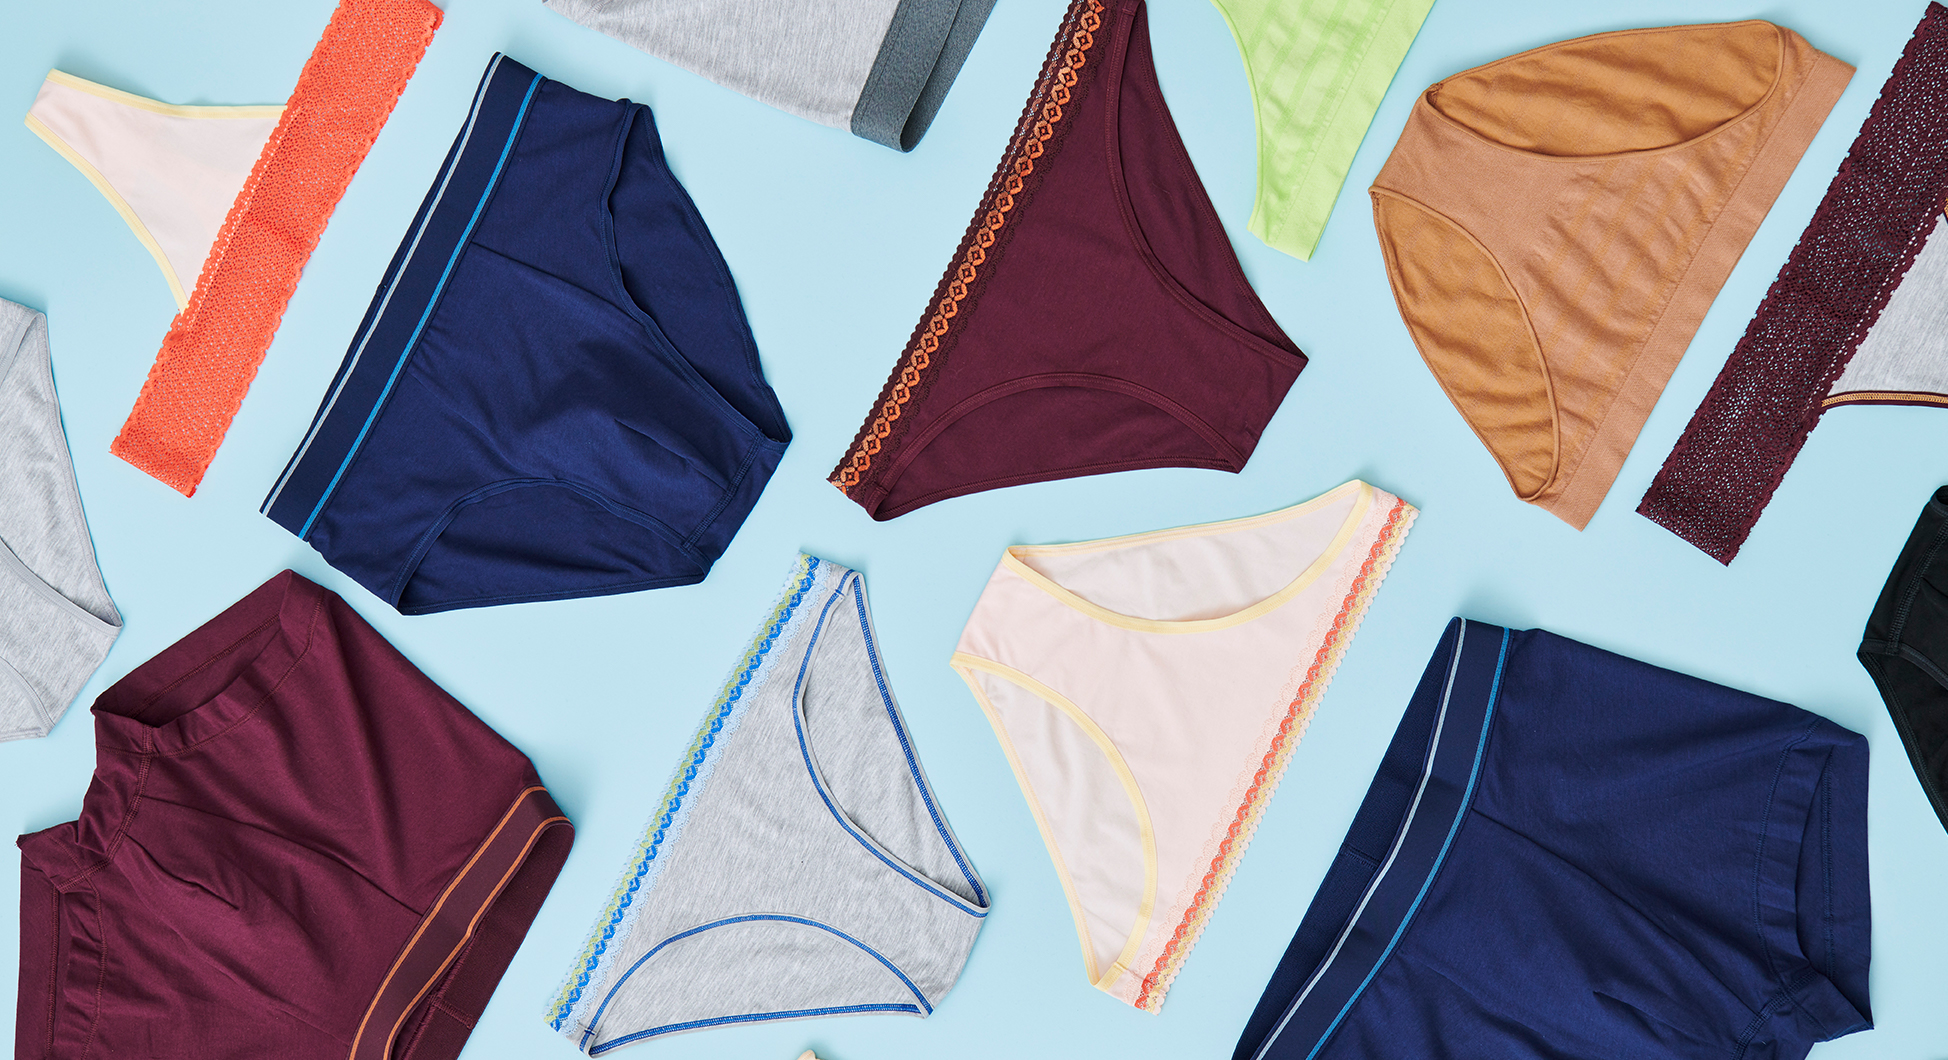 Bombas - Introducing our newest creation: Bombas Underwear: We spent years  innovating and sourcing, to make underwear that fits, feels, and even looks  better than any pair of underwear you've ever worn.